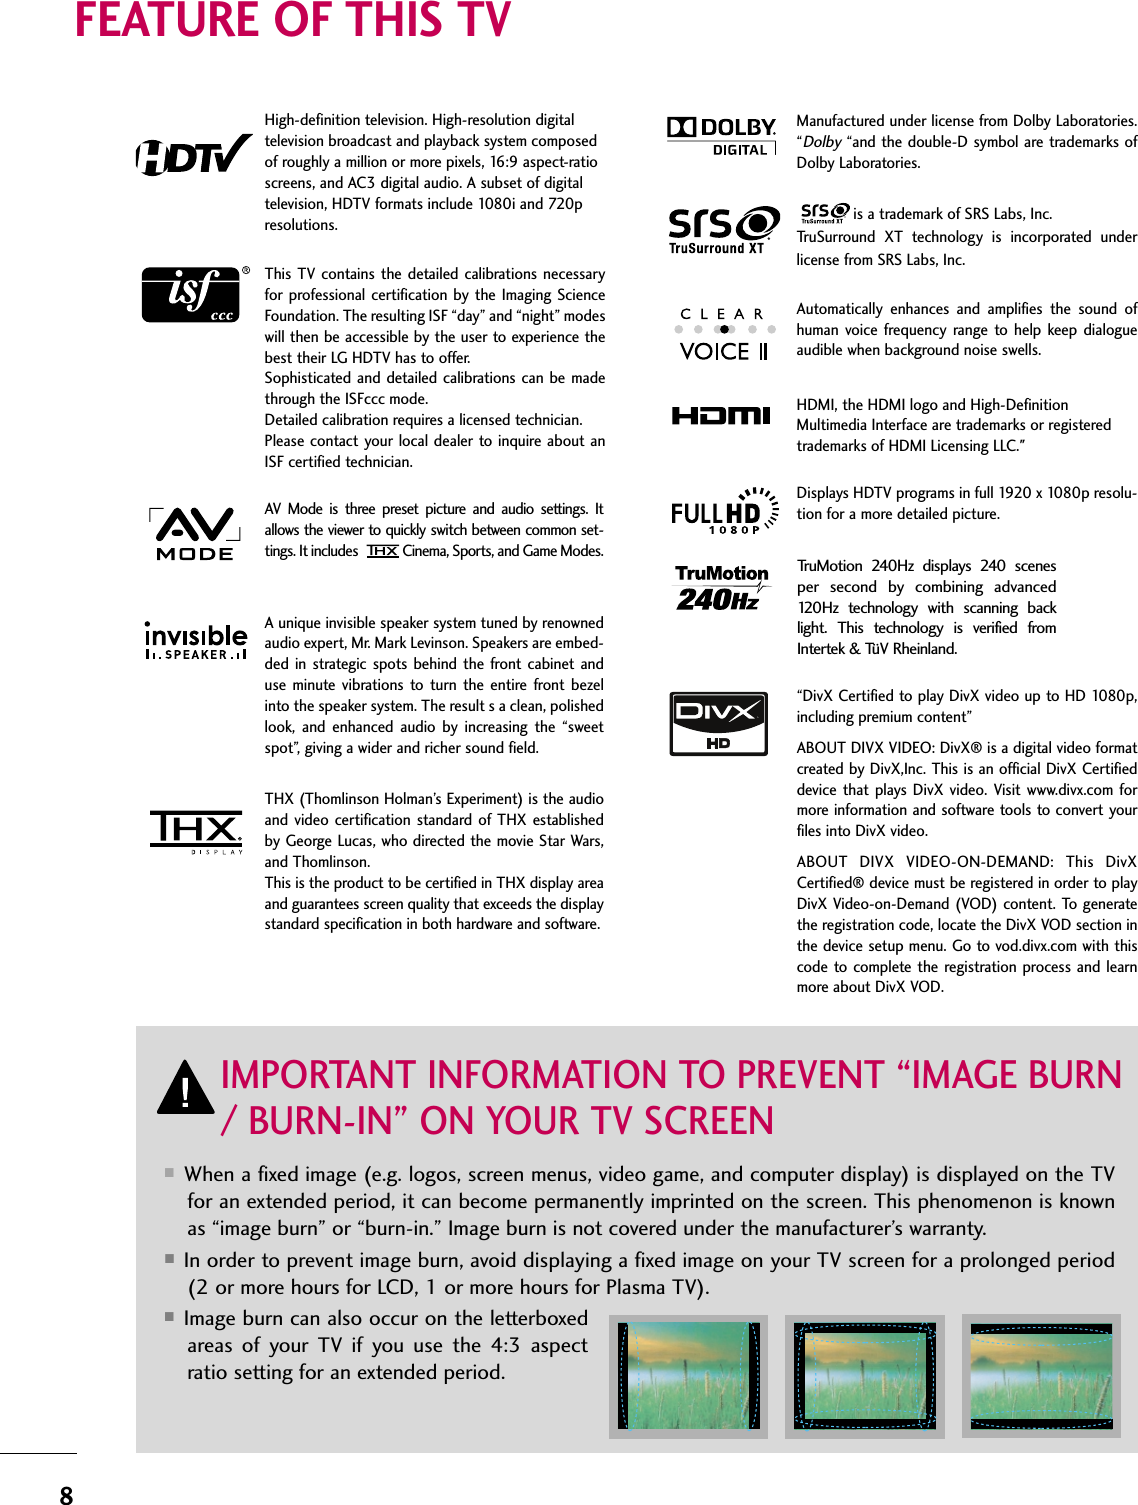 8FEATURE OF THIS TV■When a fixed image (e.g. logos, screen menus, video game, and computer display) is displayed on the TVfor an extended period, it can become permanently imprinted on the screen. This phenomenon is knownas “image burn” or “burn-in.” Image burn is not covered under the manufacturer’s warranty. ■In order to prevent image burn, avoid displaying a fixed image on your TV screen for a prolonged period(2 or more hours for LCD, 1 or more hours for Plasma TV). ■Image burn can also occur on the letterboxedareas  of  your  TV  if  you  use  the  4:3  aspectratio setting for an extended period.IMPORTANT INFORMATION TO PREVENT “IMAGE BURN/ BURN-IN” ON YOUR TV SCREENAV  Mode  is  three  preset  picture  and  audio  settings.  Itallows the viewer to quickly switch between common set-tings. It includes Cinema, Sports, and Game Modes.Displays HDTV programs in full 1920 x 1080p resolu-tion for a more detailed picture.Automatically  enhances  and  amplifies  the  sound  ofhuman  voice  frequency range  to  help  keep  dialogueaudible when background noise swells.A unique invisible speaker system tuned by renownedaudio expert, Mr. Mark Levinson. Speakers are embed-ded  in  strategic spots  behind the  front cabinet anduse  minute  vibrations  to  turn  the  entire  front  bezelinto the speaker system. The result s a clean, polishedlook,  and  enhanced  audio  by  increasing  the  “sweetspot”, giving a wider and richer sound field.HDMI, the HDMI logo and High-DefinitionMultimedia Interface are trademarks or registeredtrademarks of HDMI Licensing LLC.&quot;is a trademark of SRS Labs, Inc.TruSurround  XT  technology  is  incorporated  underlicense from SRS Labs, Inc.Manufactured under license from Dolby Laboratories.“Dolby“and the double-D symbol are trademarks ofDolby Laboratories. This TV contains the  detailed calibrations necessaryfor professional  certification by  the  Imaging  ScienceFoundation. The resulting ISF “day” and “night” modeswill then be accessible by the user to experience thebest their LG HDTV has to offer.Sophisticated  and detailed  calibrations  can be madethrough the ISFccc mode.Detailed calibration requires a licensed technician.Please contact your  local dealer to inquire  about anISF certified technician.High-definition television. High-resolution digitaltelevision broadcast and playback system composedof roughly a million or more pixels, 16:9 aspect-ratioscreens, and AC3 digital audio. A subset of digitaltelevision, HDTV formats include 1080i and 720presolutions.TruMotion  240Hz  displays  240  scenesper  second  by  combining  advanced120Hz  technology  with  scanning  backlight.  This  technology  is  verified  fromIntertek &amp; TüV Rheinland.“DivX Certified to play DivX video up to HD 1080p,including premium content”ABOUT DIVX VIDEO: DivX® is a digital video formatcreated by DivX,Inc. This is an official DivX Certifieddevice that  plays  DivX  video.  Visit www.divx.com  formore information and software tools to convert yourfiles into DivX video.ABOUT  DIVX  VIDEO-ON-DEMAND:  This  DivXCertified® device must be registered in order to playDivX Video-on-Demand (VOD) content. To generatethe registration code, locate the DivX VOD section inthe device setup menu. Go to vod.divx.com with thiscode to  complete  the  registration process and learnmore about DivX VOD. THX (Thomlinson Holman’s Experiment) is the audioand  video  certification standard  of  THX  establishedby George Lucas, who directed the movie Star Wars,and Thomlinson. This is the product to be certified in THX display areaand guarantees screen quality that exceeds the displaystandard specification in both hardware and software. 